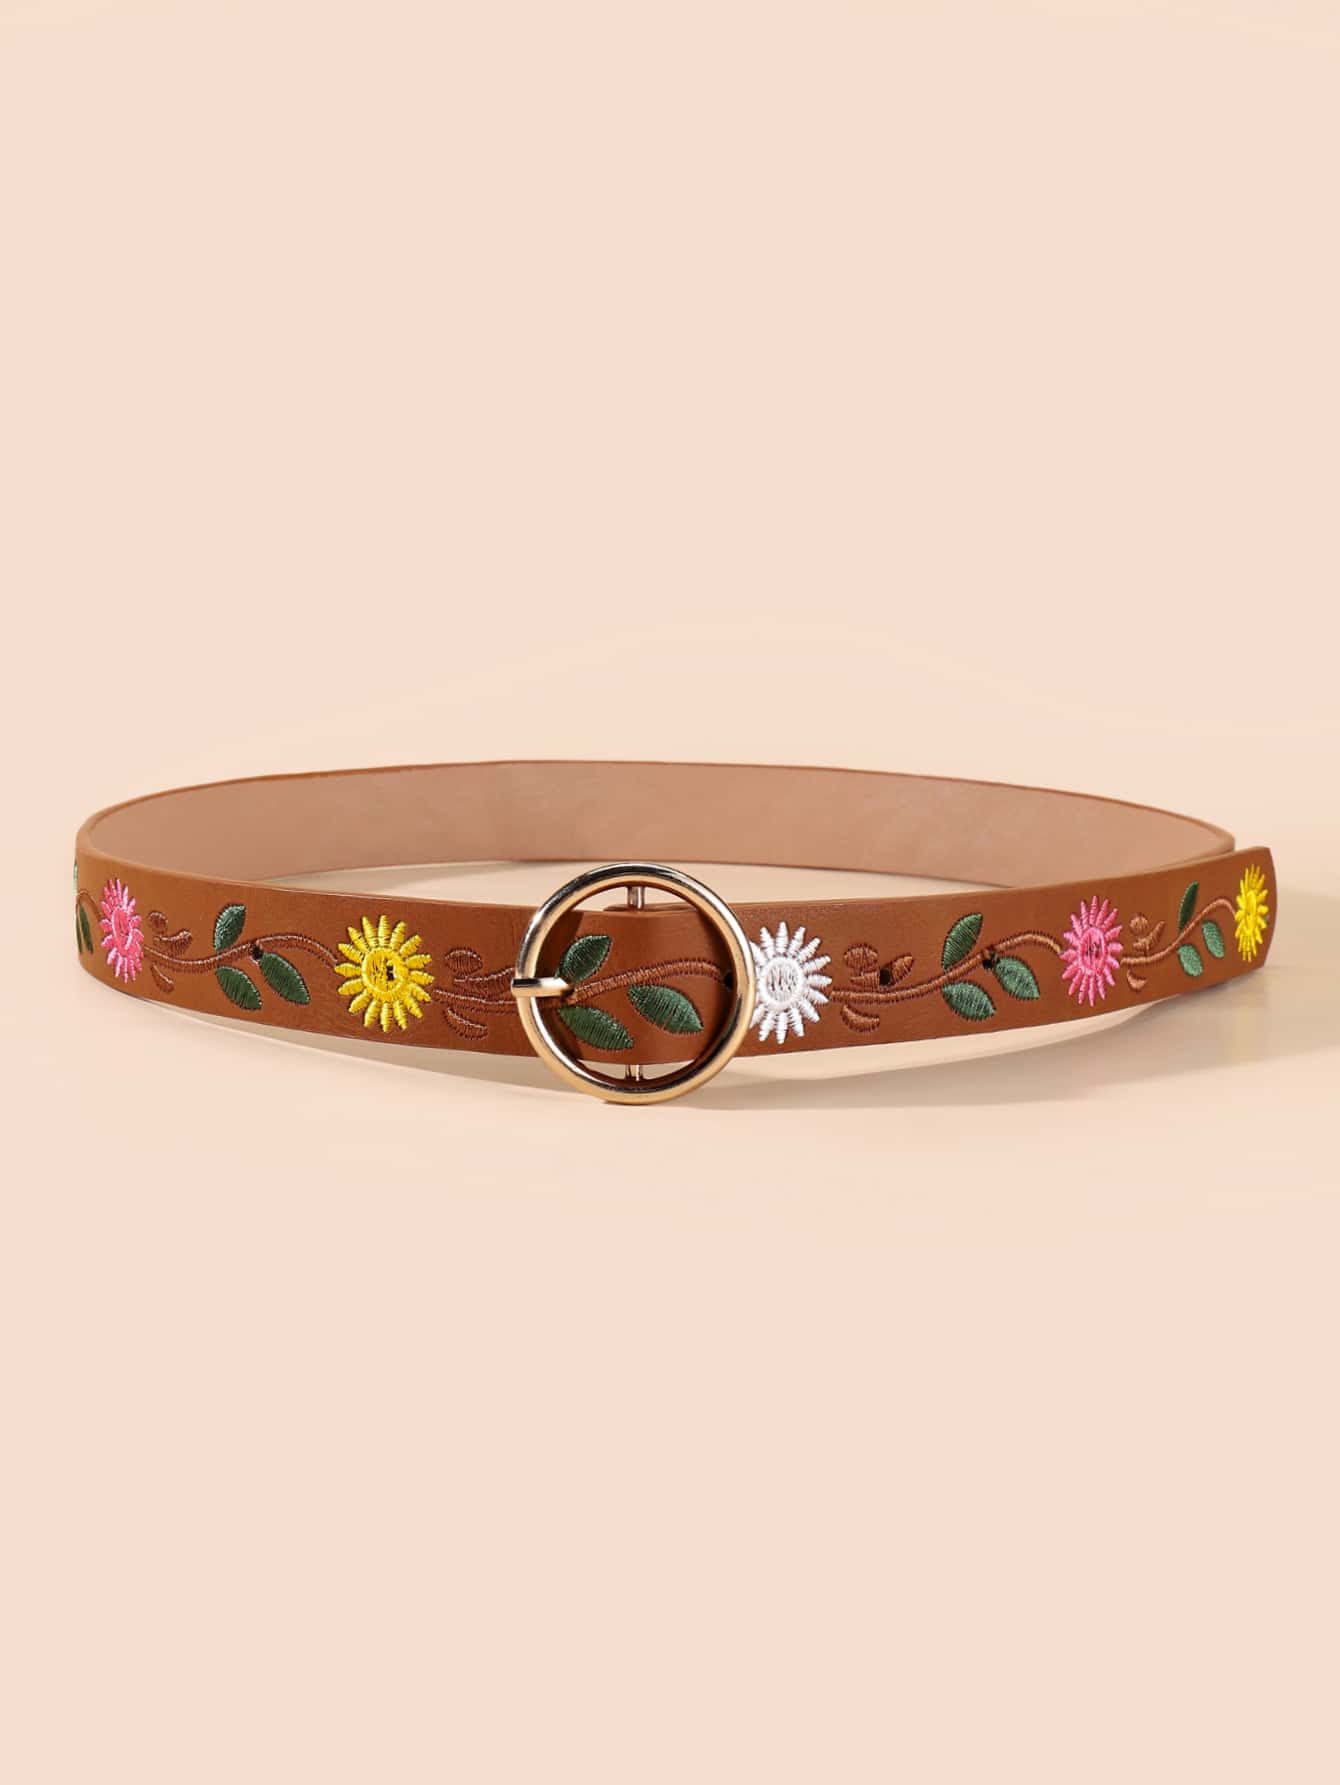 Flower Embroidered Belt With Hole Punch